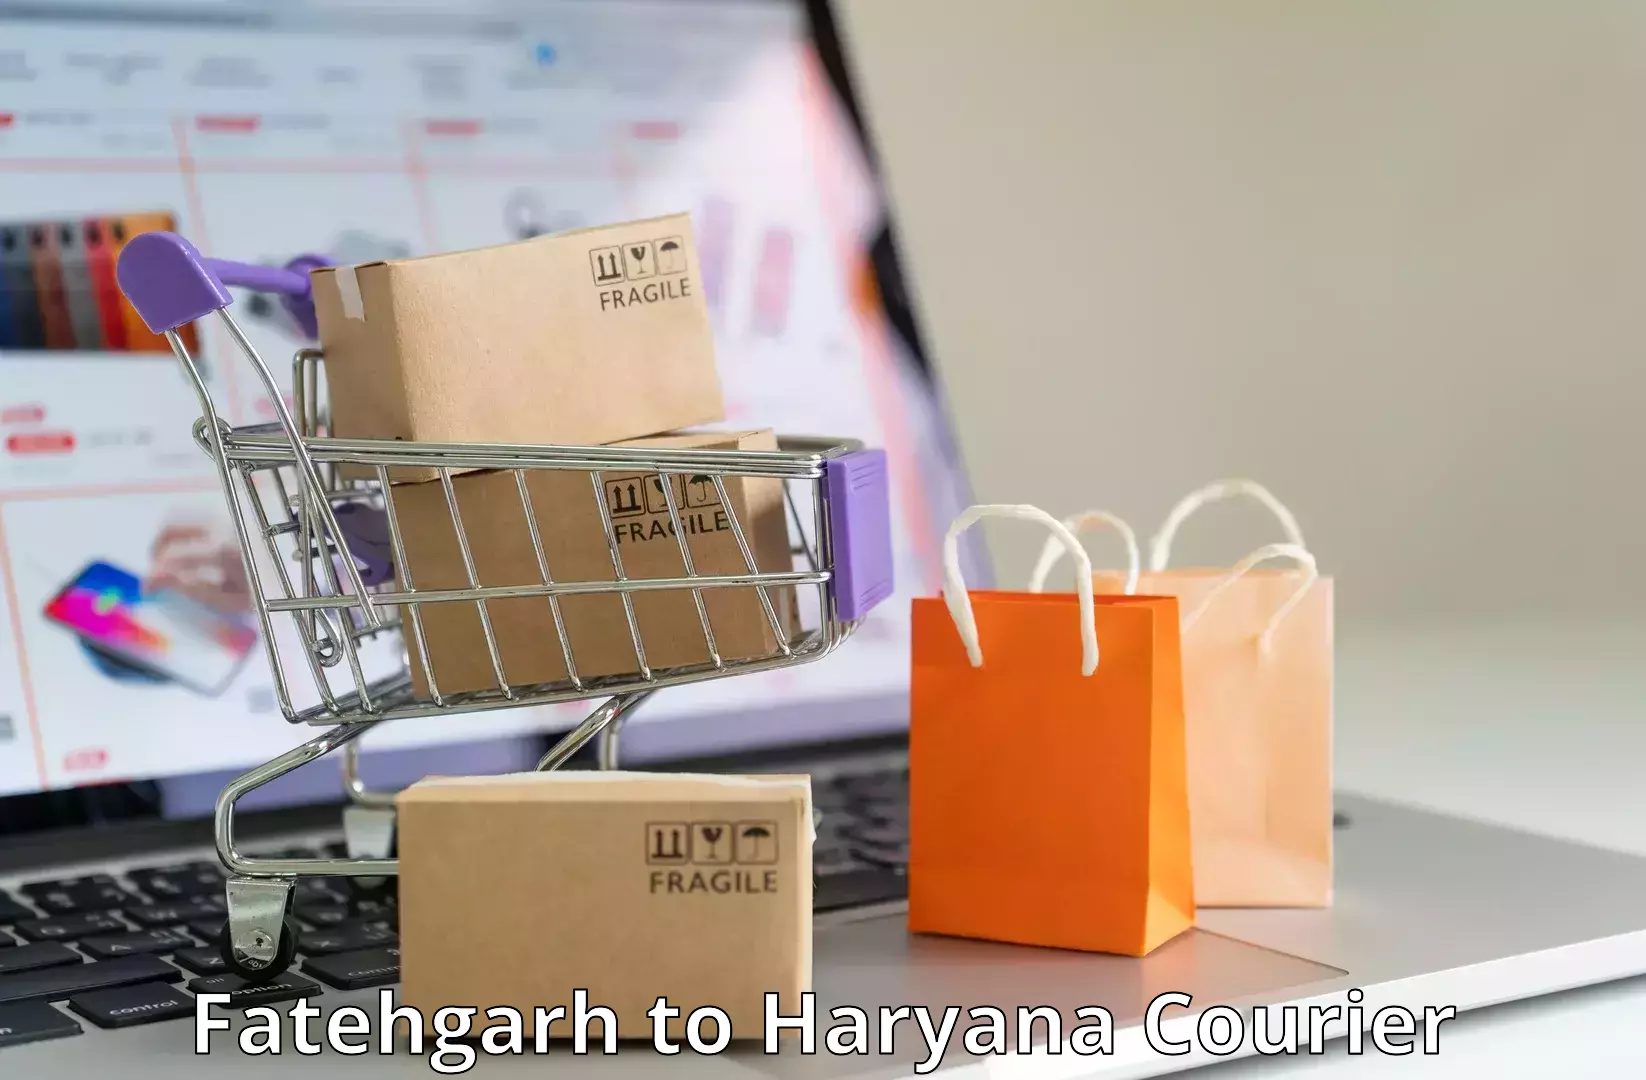 State-of-the-art courier technology Fatehgarh to Chandi Rohtak